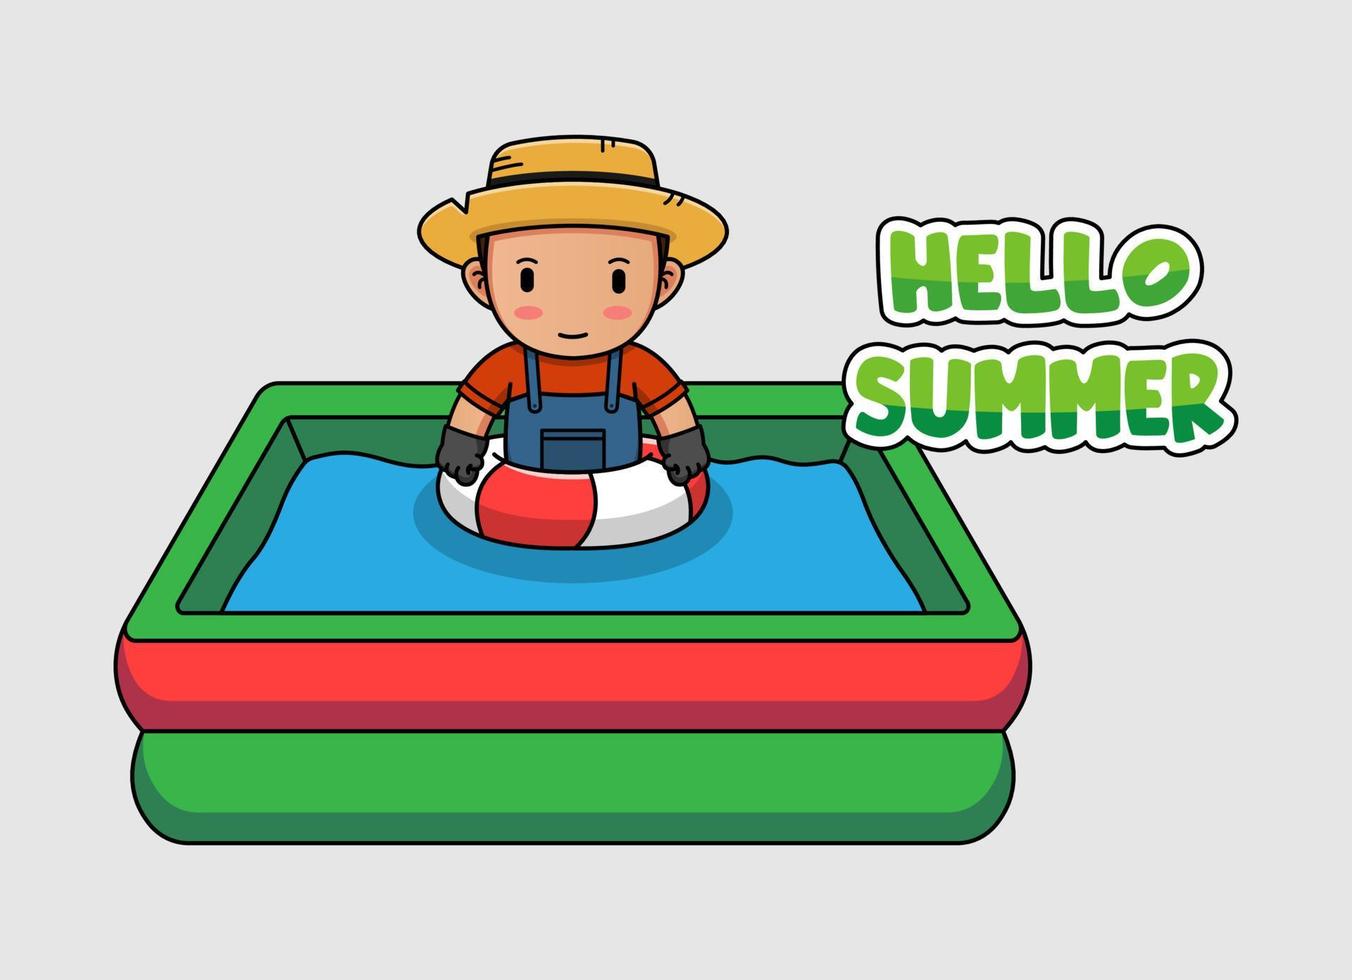 Cute farmer swimming with hello summer greeting banner vector